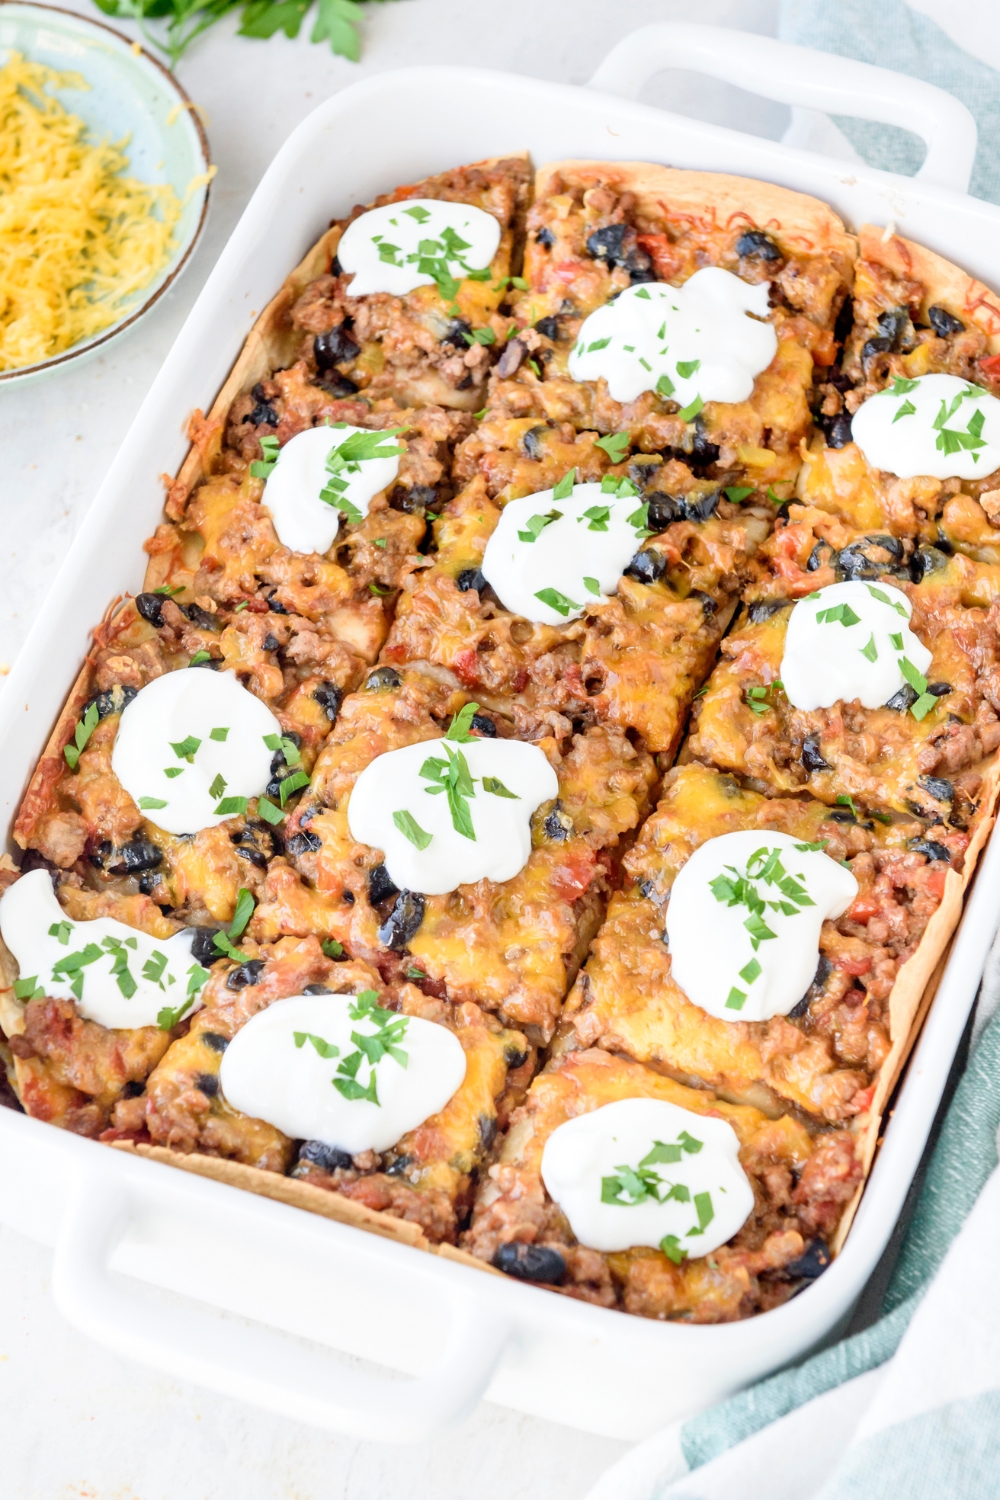 A baking dish filled with Mexican lasagna that's been cut into equal-sized pieces and topped with a dollop of sour cream on each slice.